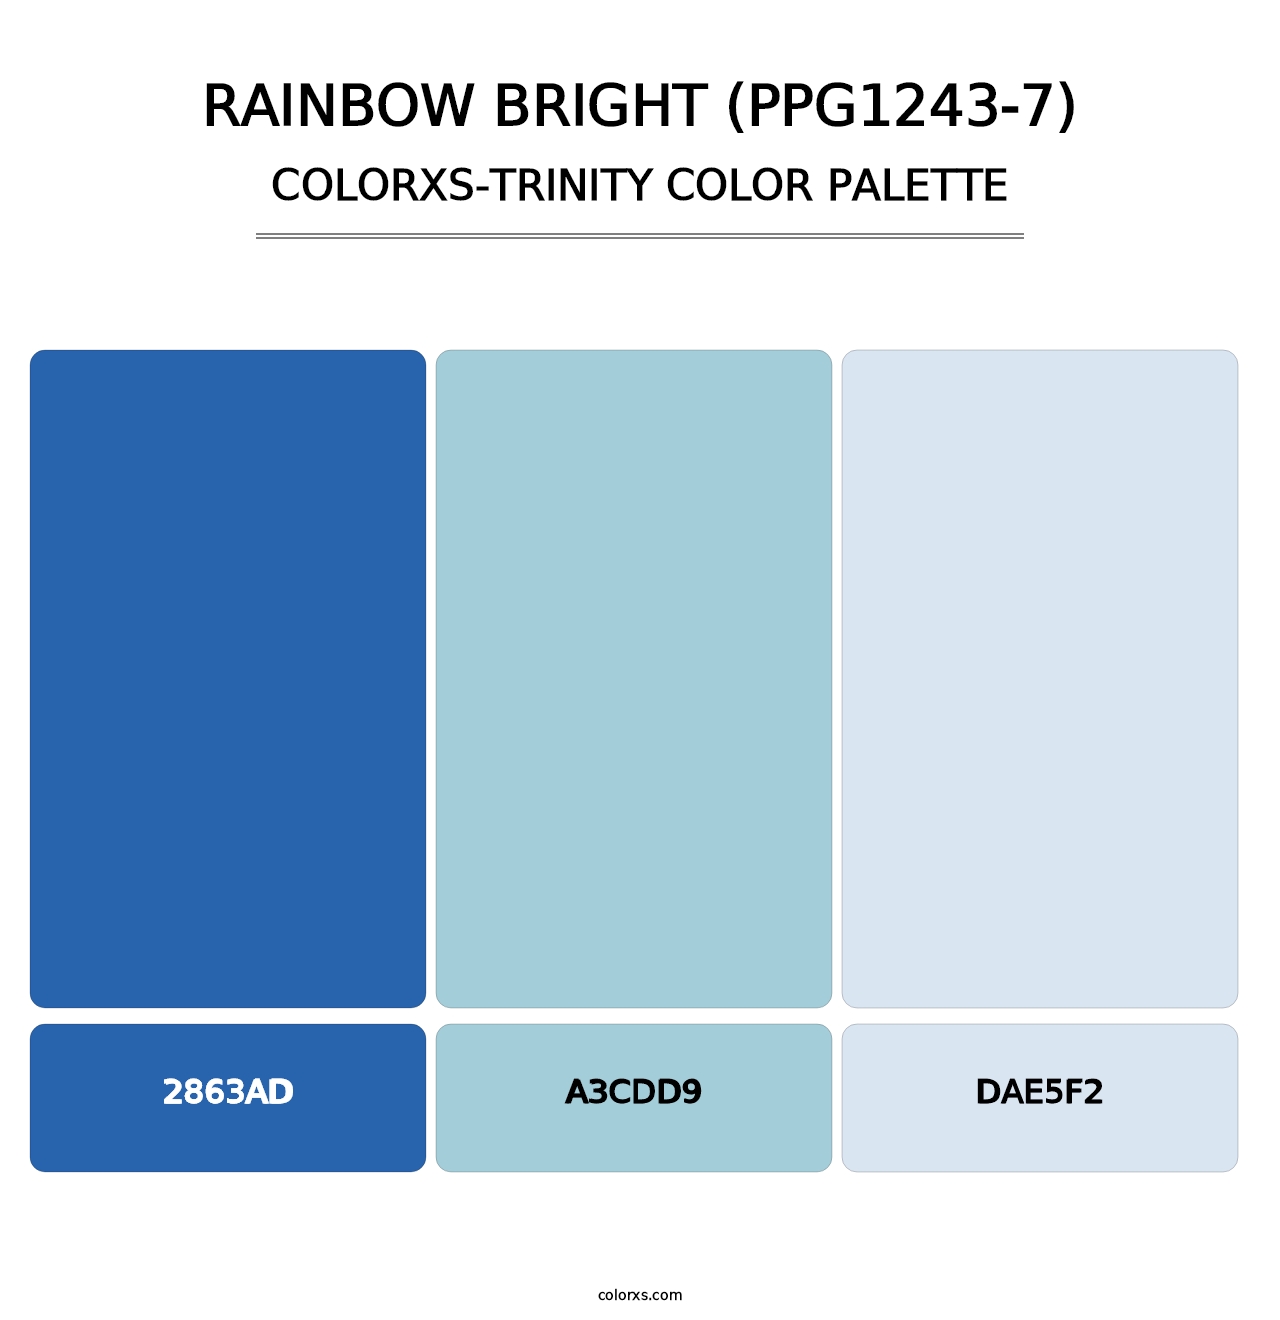 Rainbow Bright (PPG1243-7) - Colorxs Trinity Palette